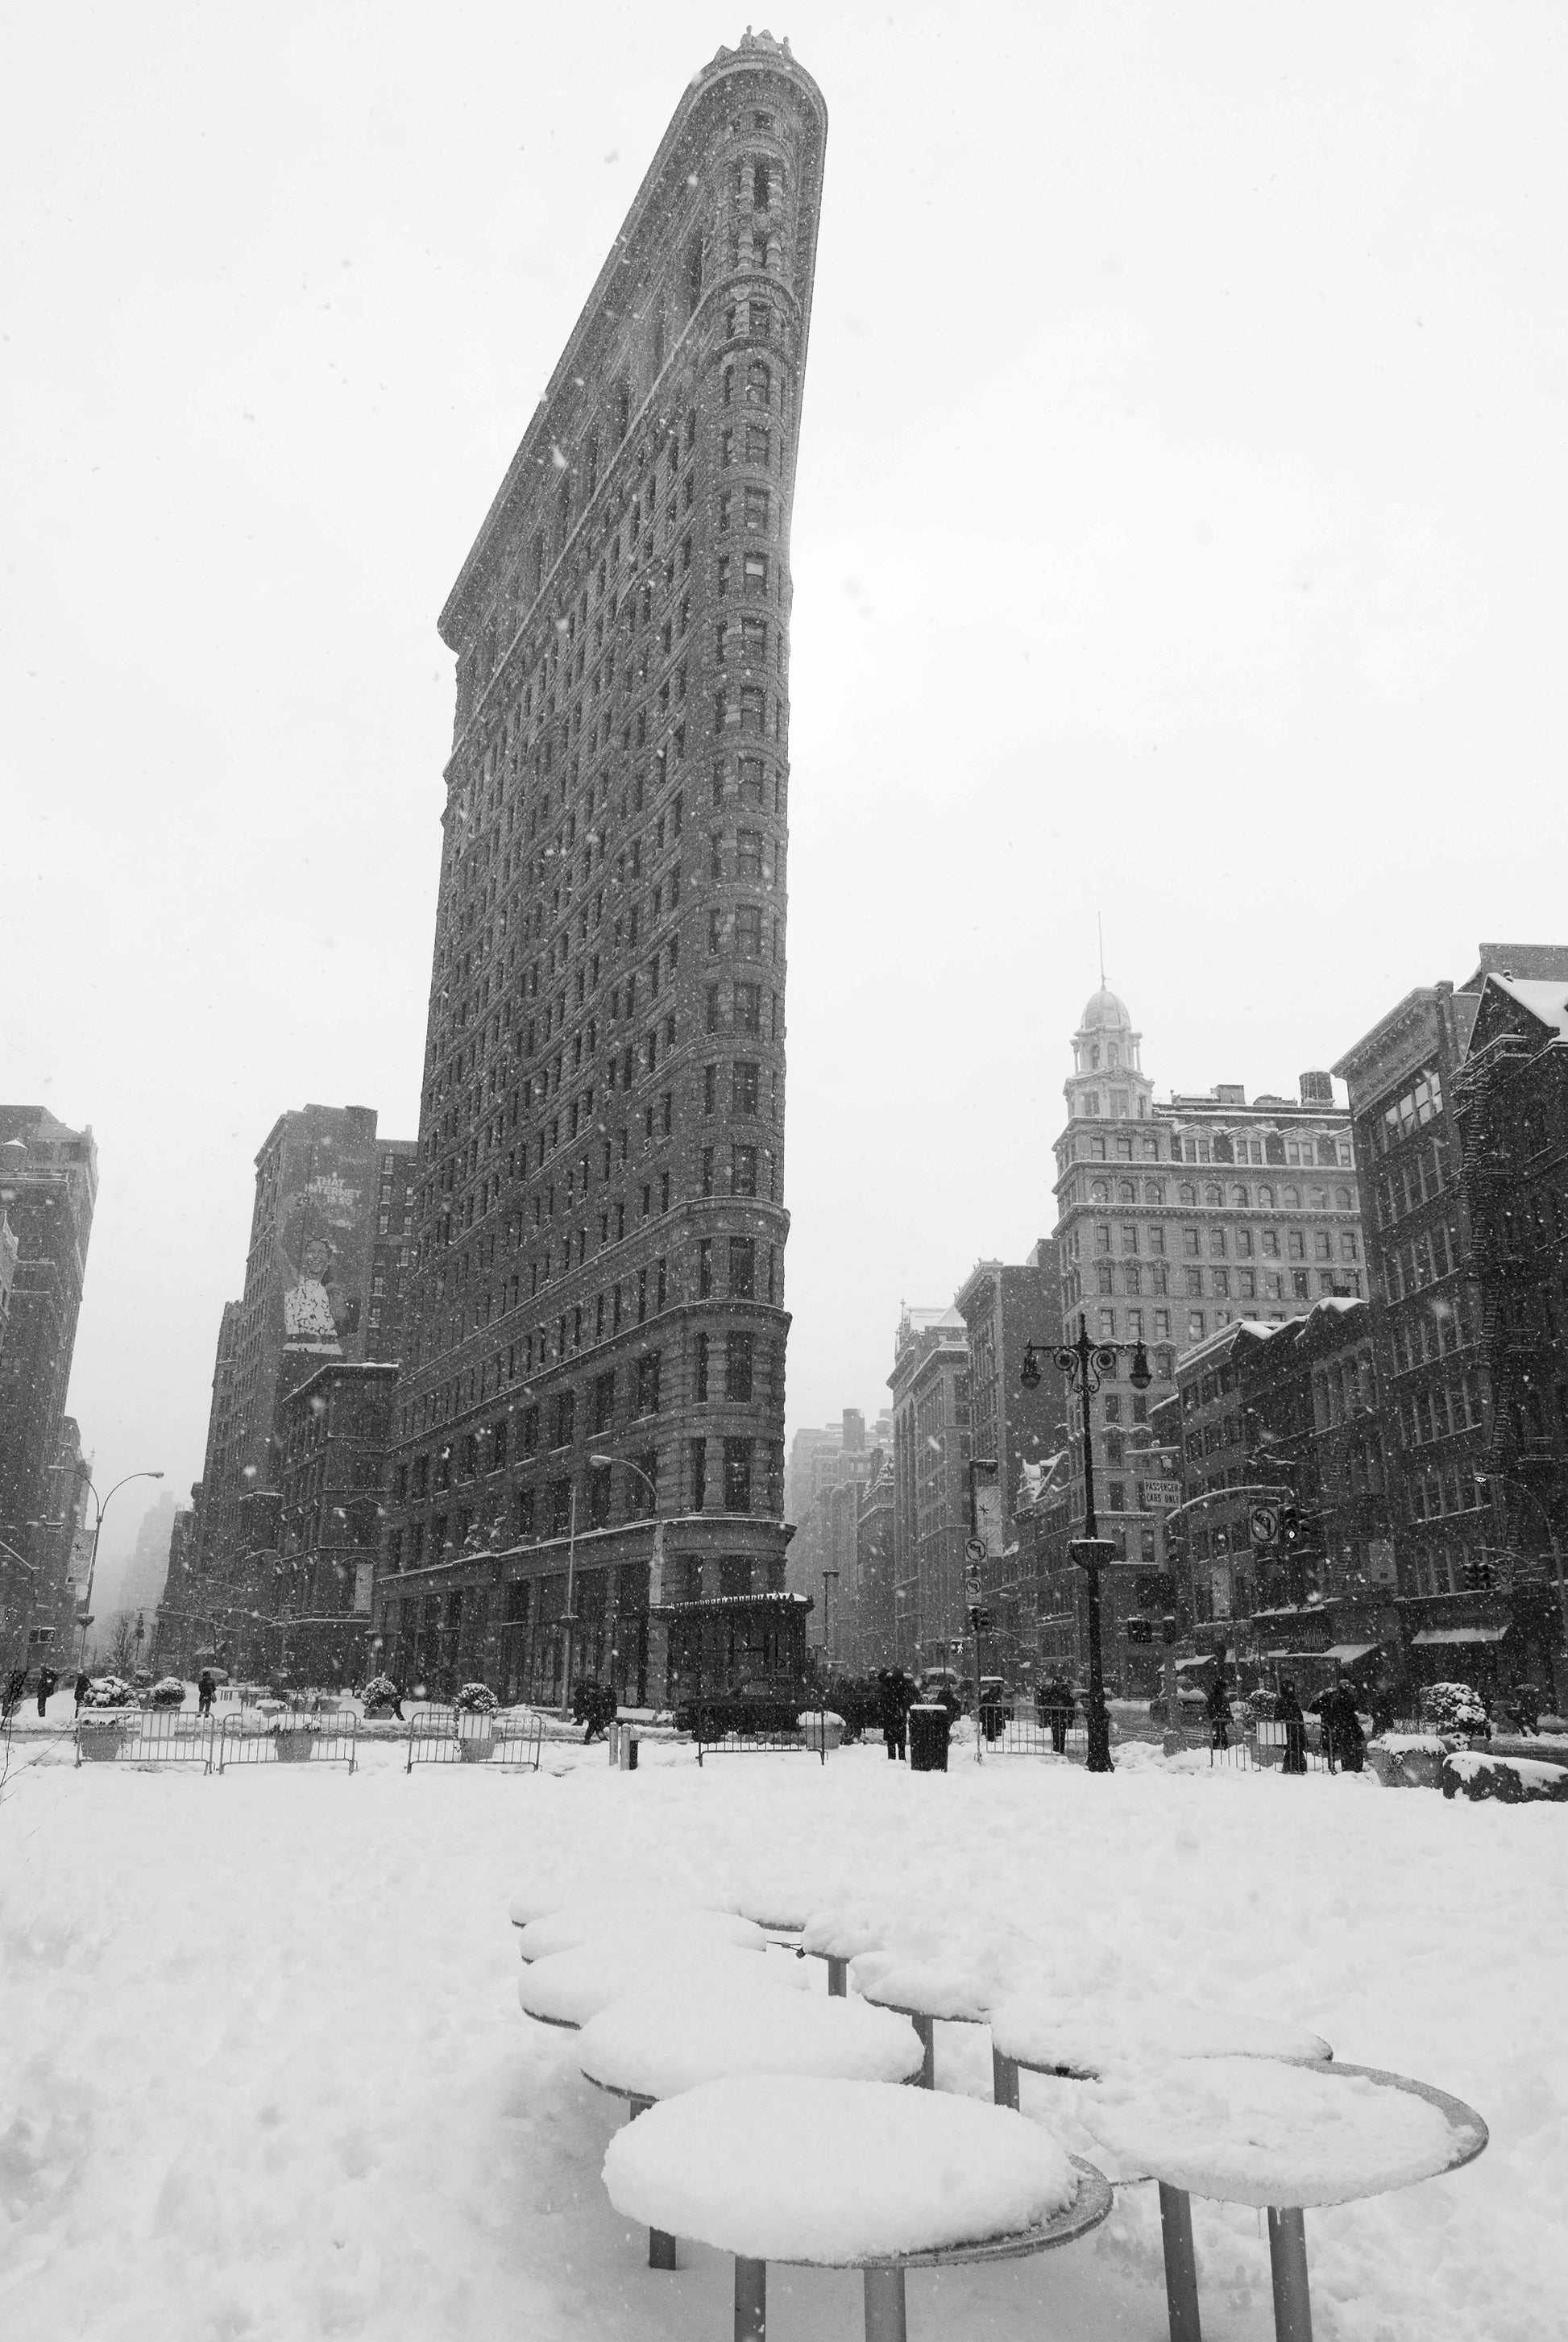 Alessandra Mattanza | FROM A DISTANCE, Flatiron Building. The iconic Flatiron Building stands in a New York winter scene.  Available as a black and white photographic print on clear acrylic.